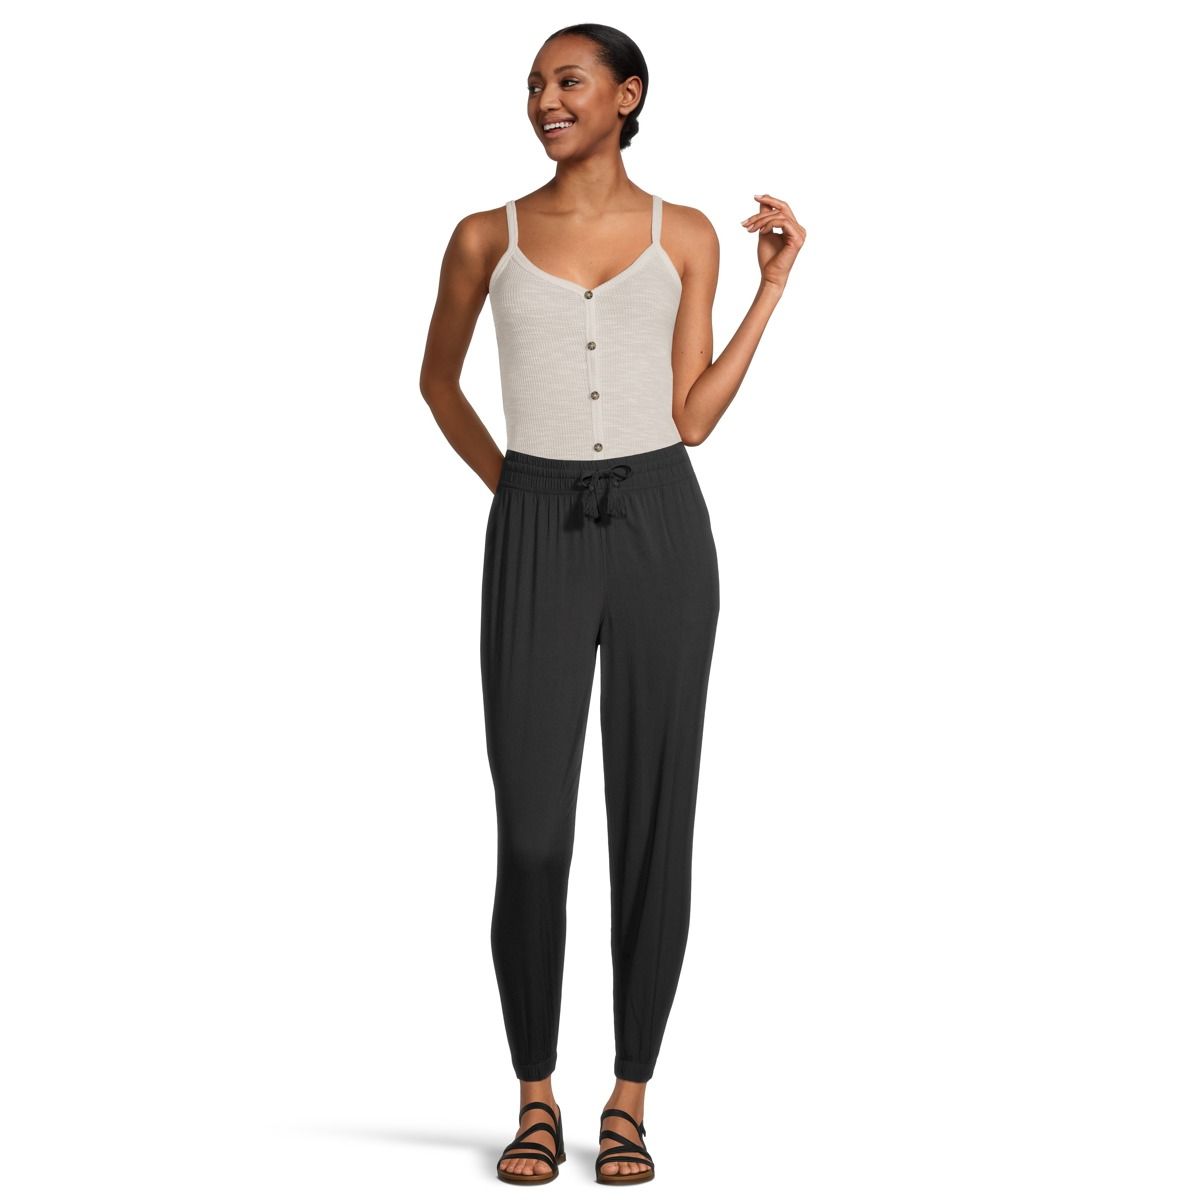 Charlo Leggings Depot Drawstring Waist Joggers - - Deal of the day